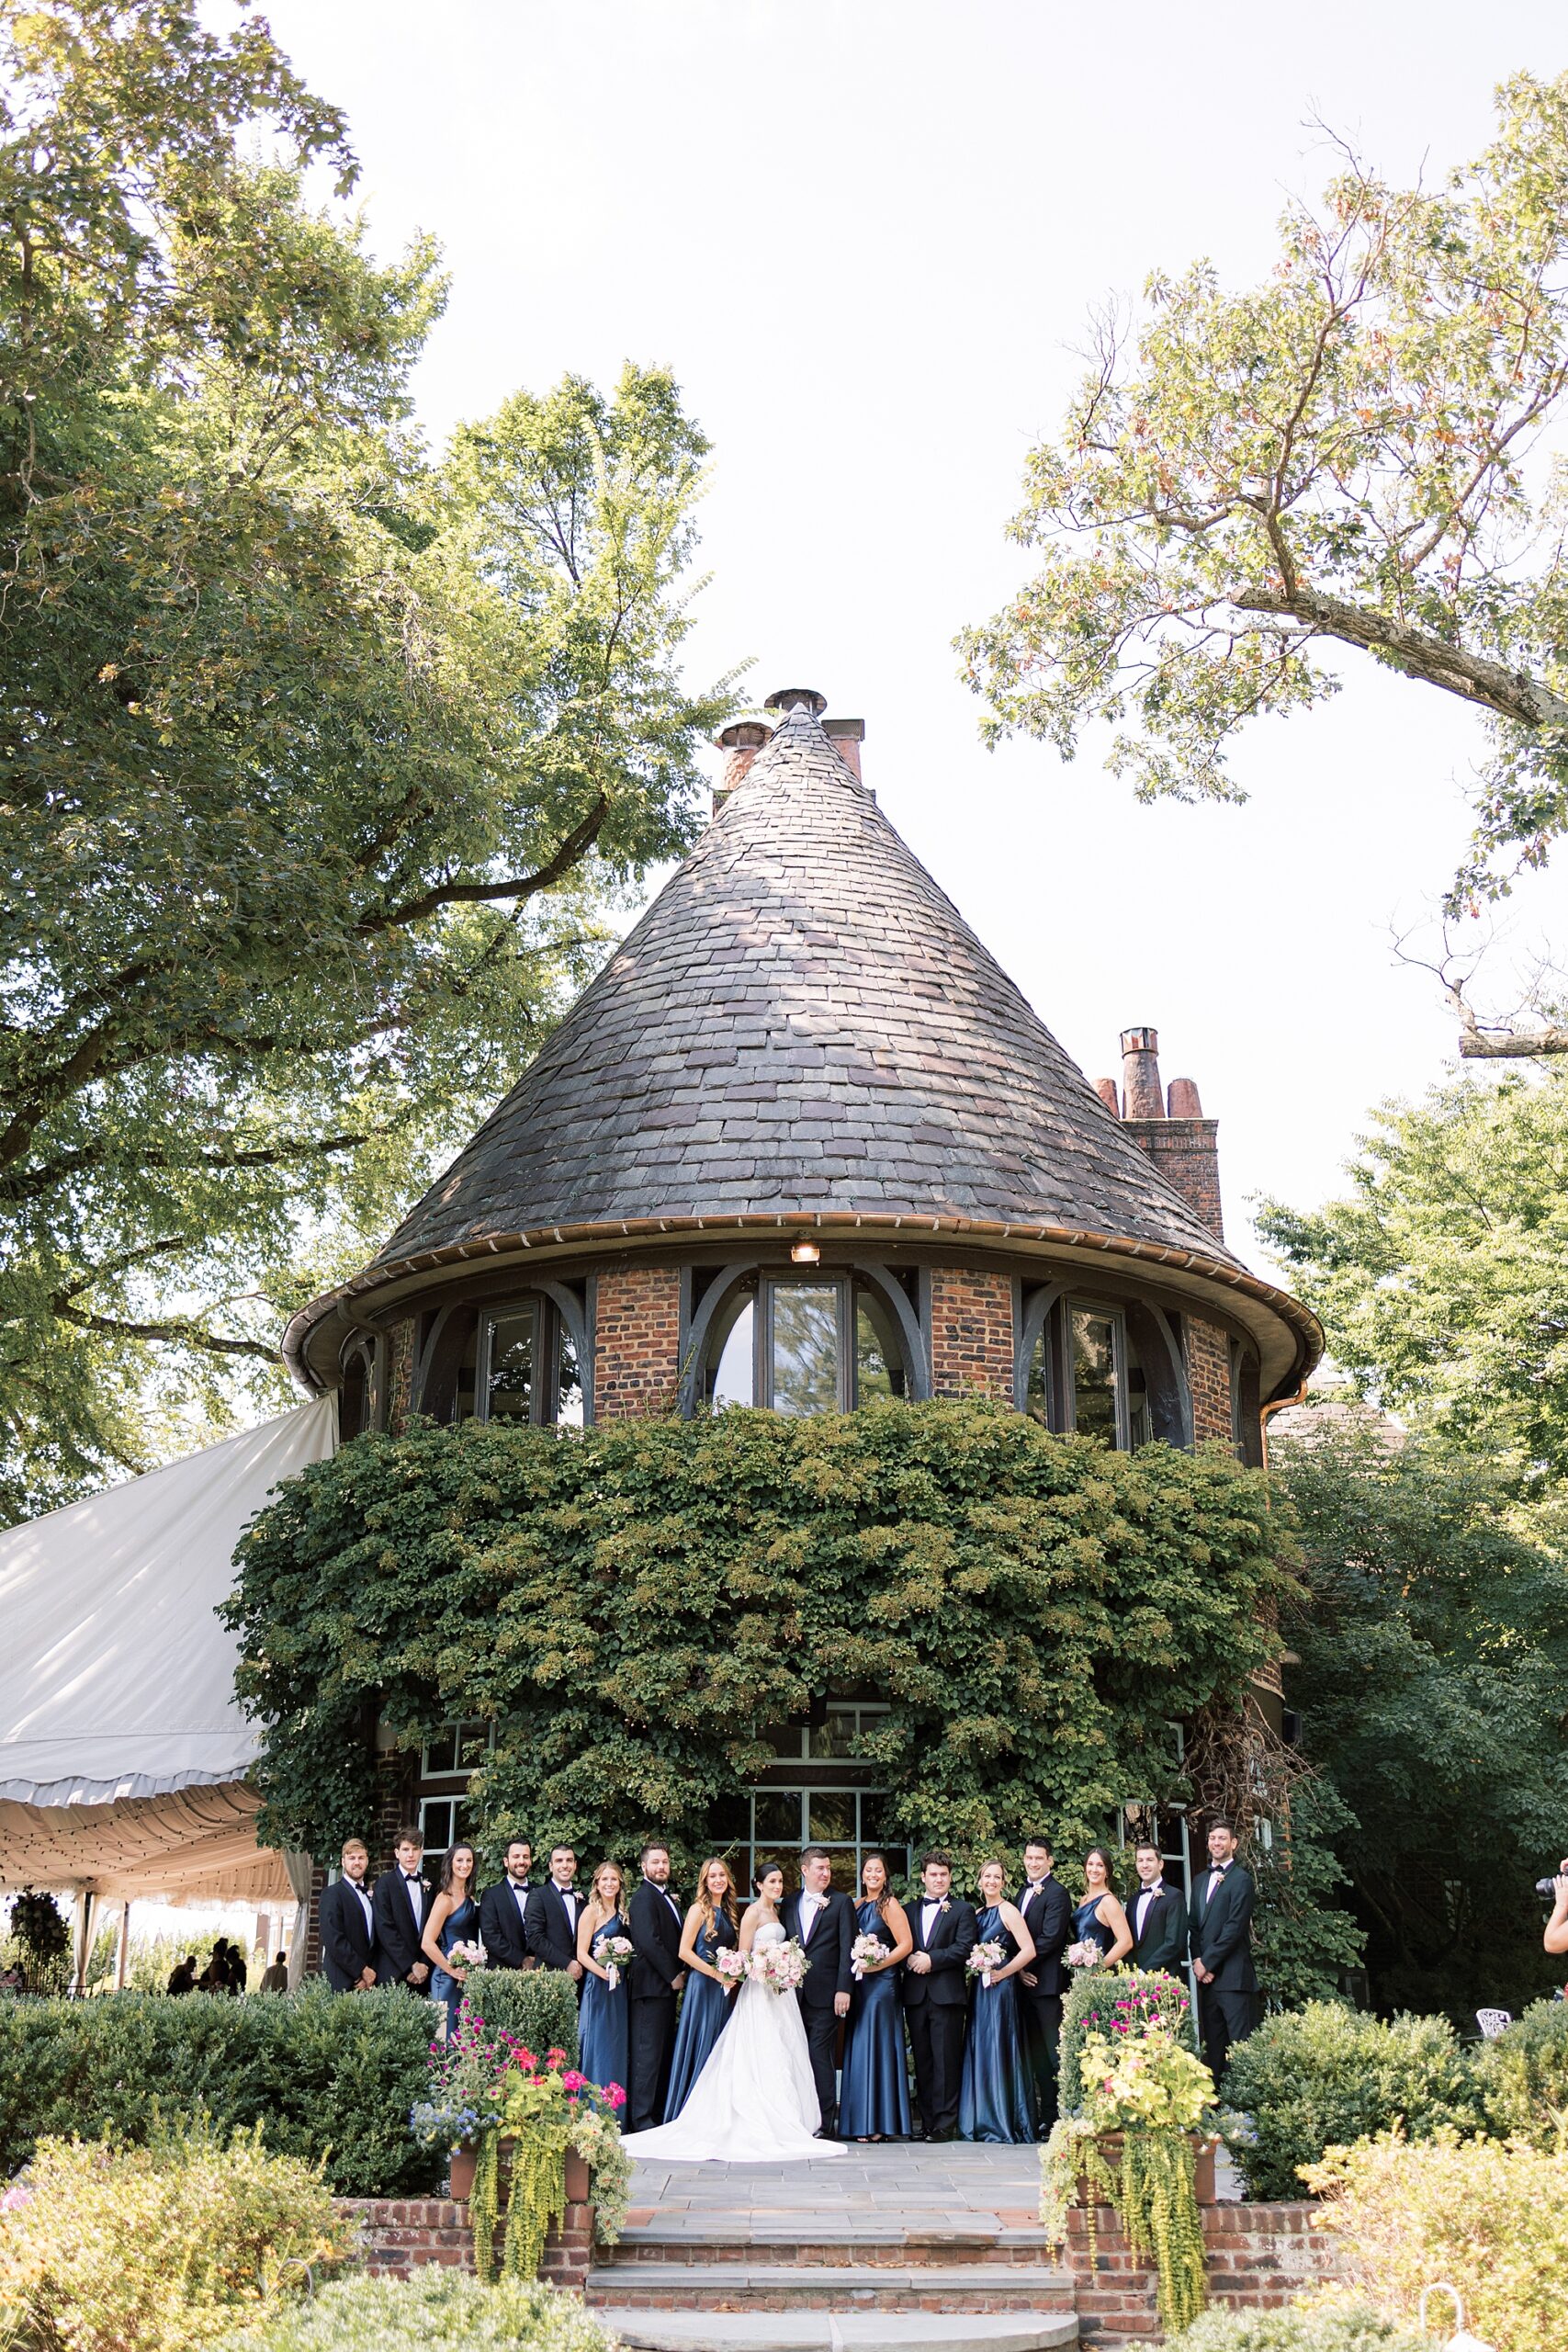 bride poses with bridesmaids in navy gowns by turret at Greenville Country Club